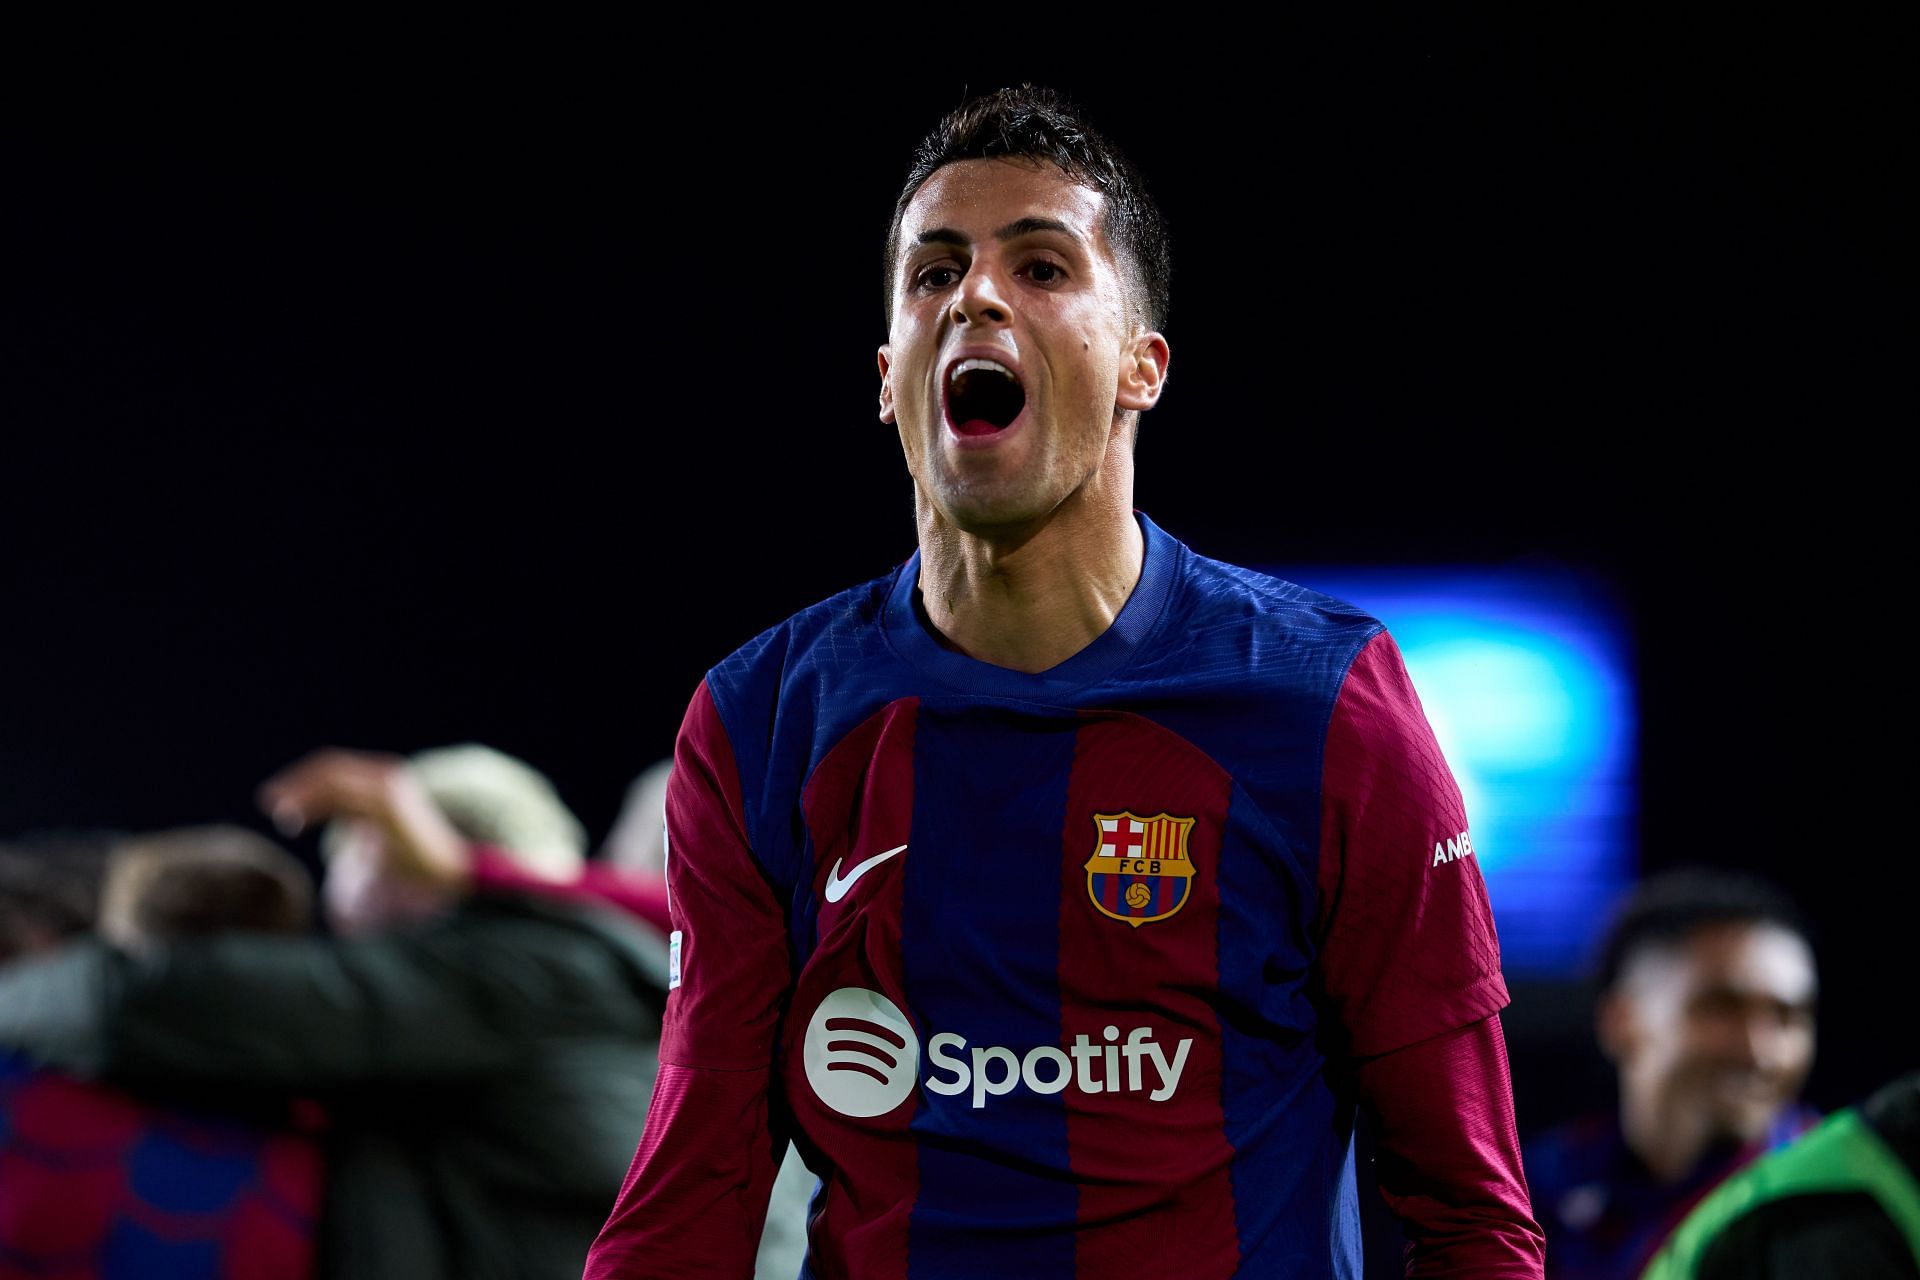 Joao Cancelo has been a hit at the Camp Nou.